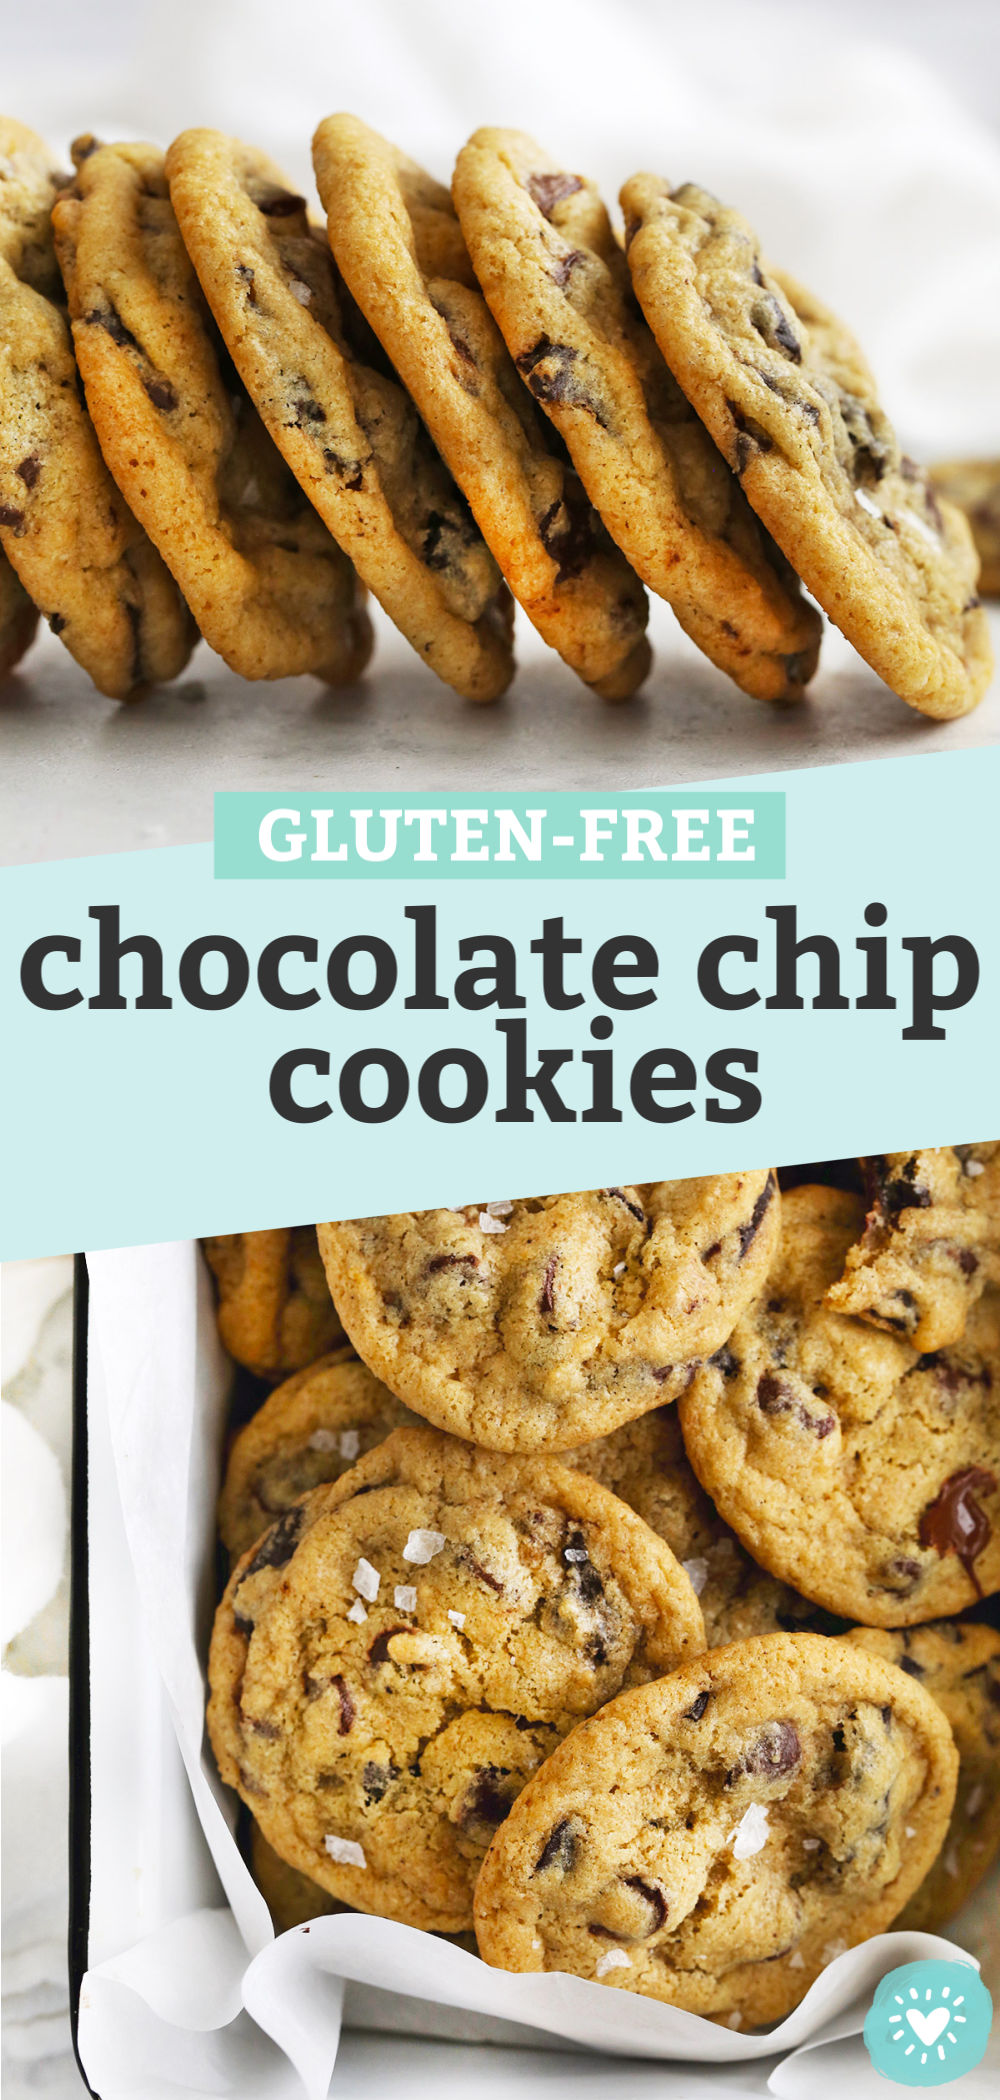 Collage of images of gluten free chocolate chip cookies with text overlay that reads "Gluten-Free Chocolate Chip Cookies"